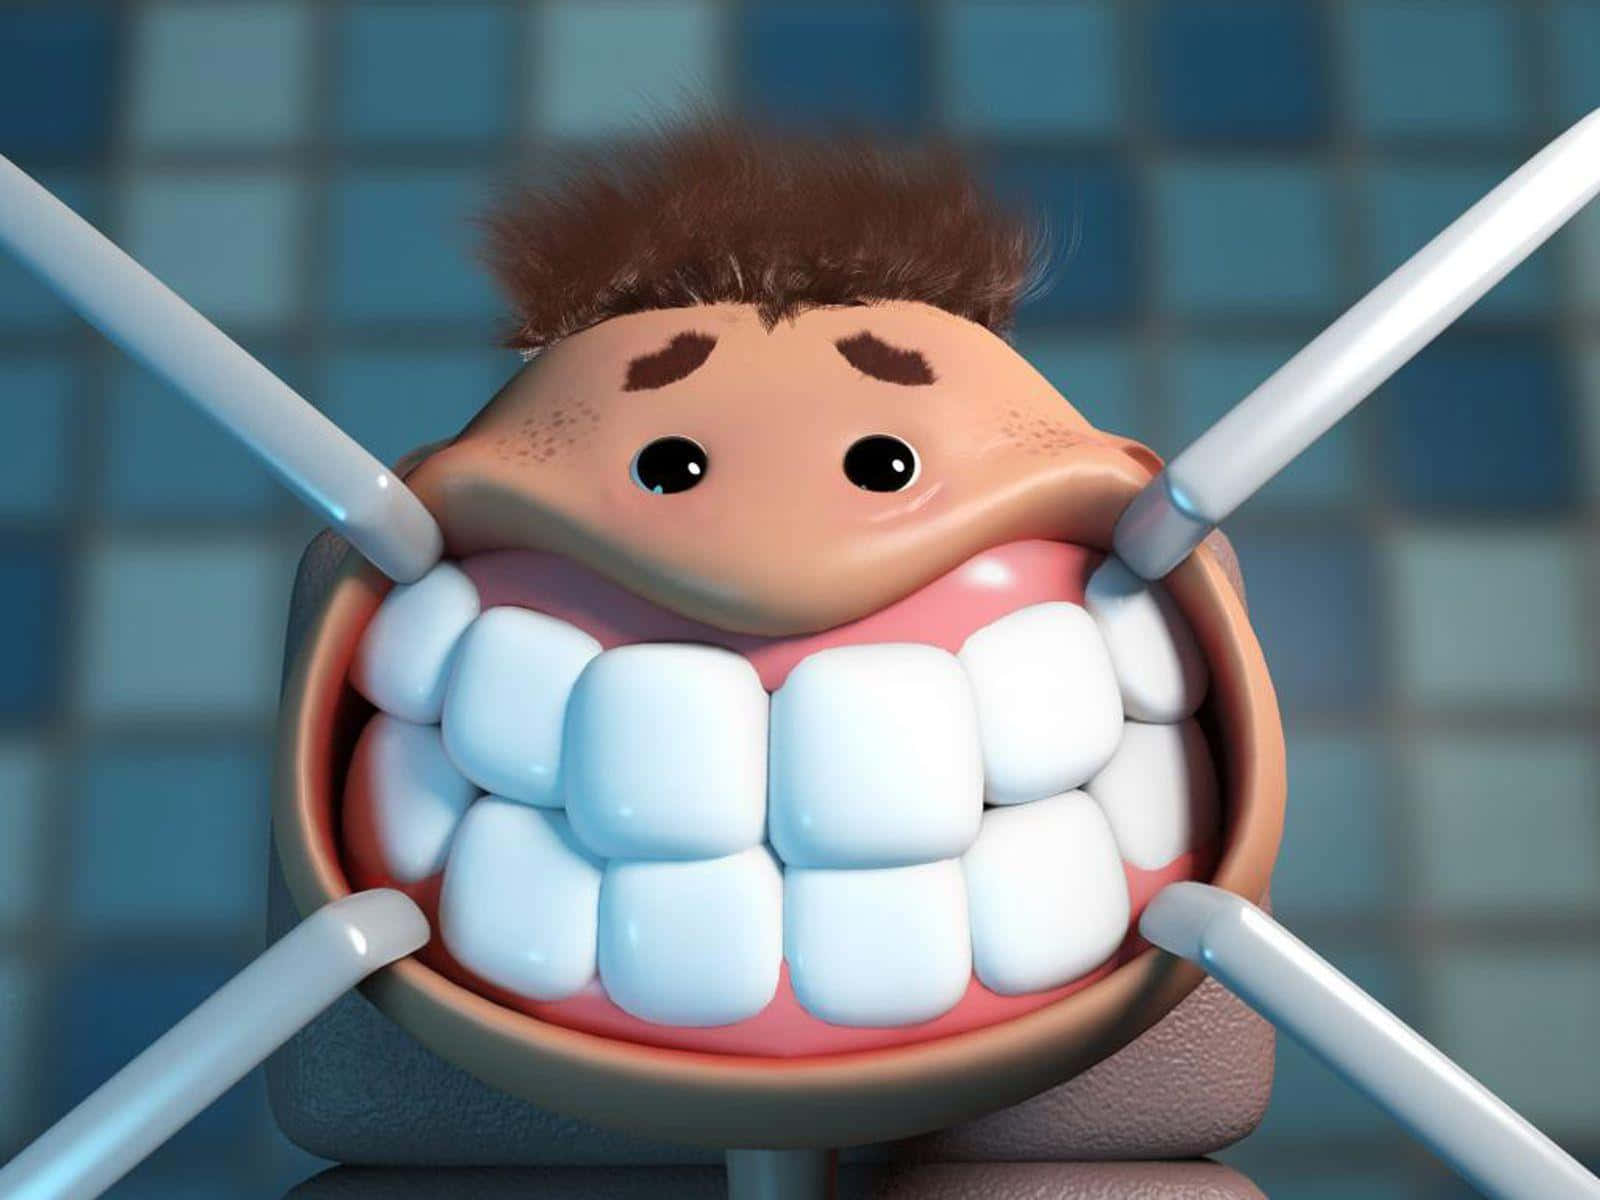 A Cartoon Man With A Tooth Brush And A Toothbrush